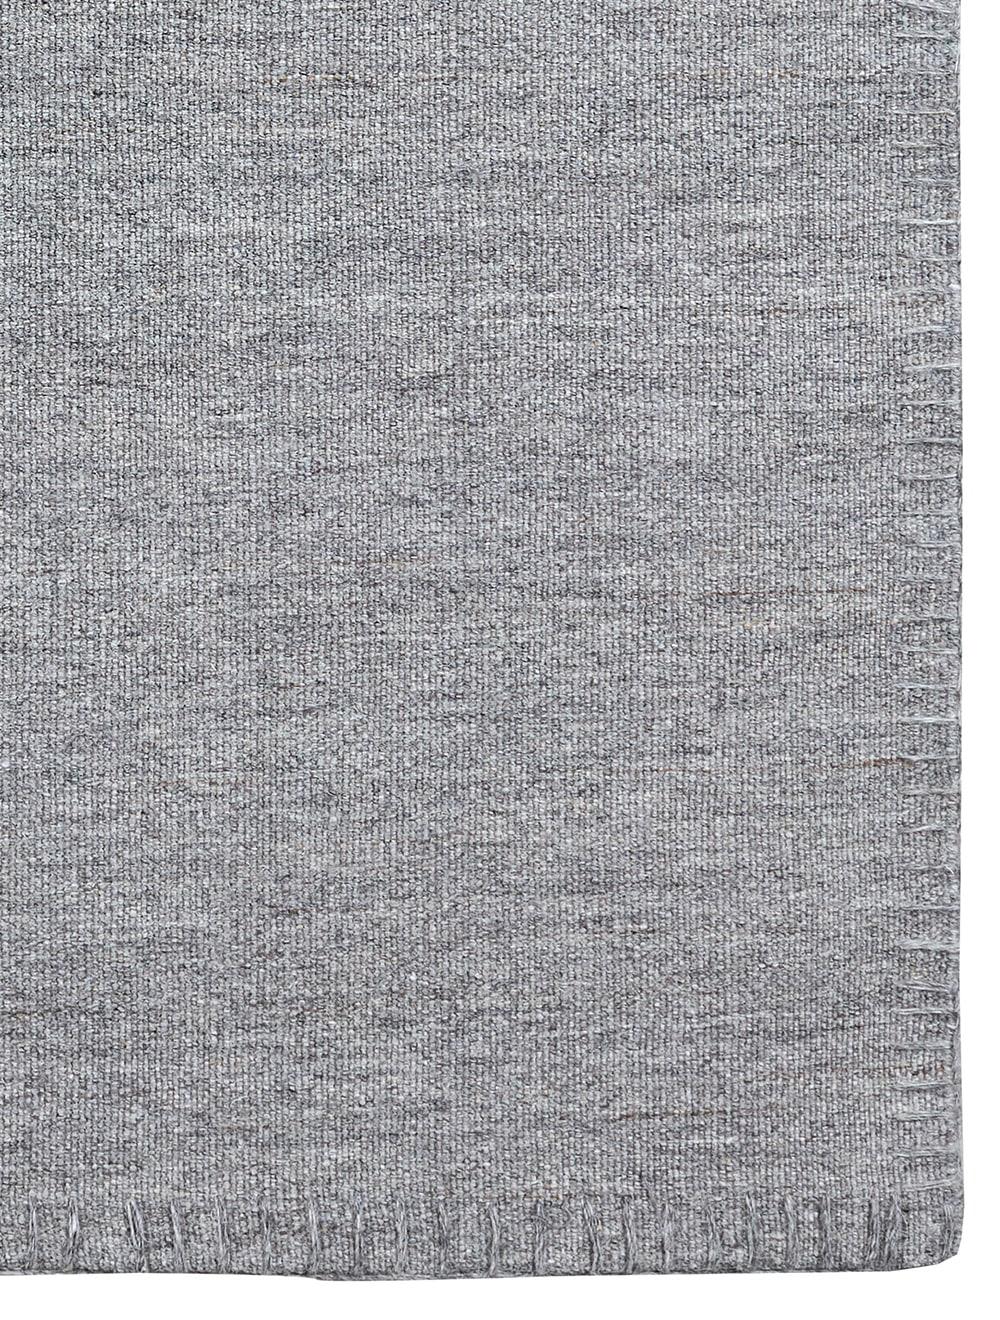 Stone with Stitches Escape Kelim Carpet by Massimo Copenhagen
Designed by Space Copenhagen
Handwoven
Materials: 100% undyed natural wool.
Dimensions: W 300 x H 400 cm
Available colors: Chalk, Chalk with Fringes, Light Beige, Light Beige with